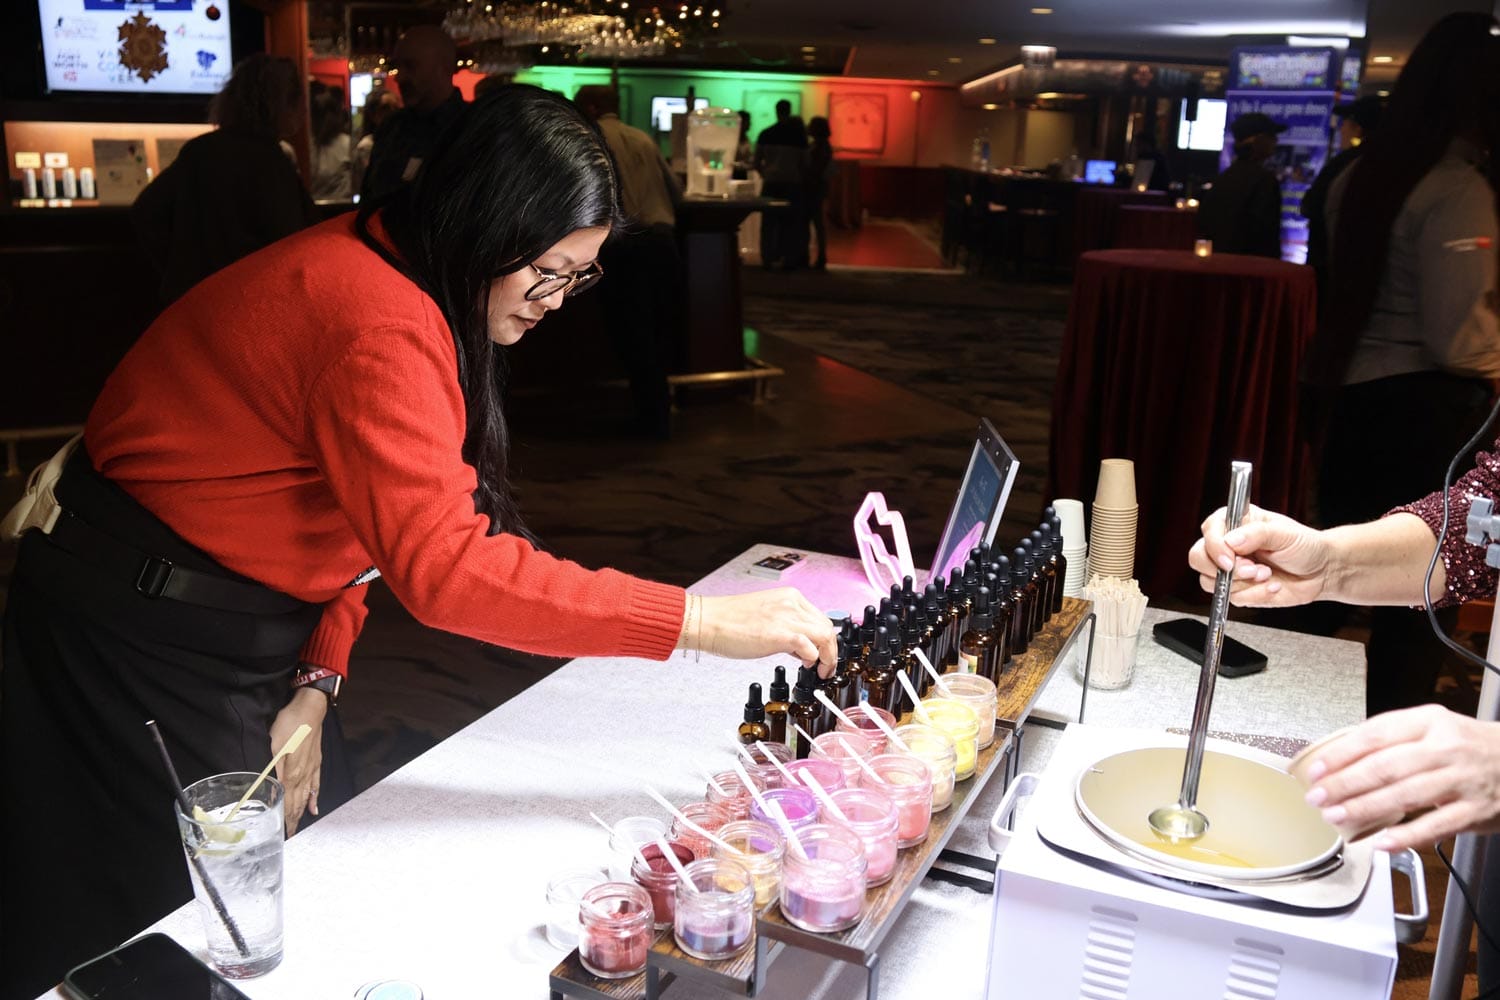 Woman serving beverages at a catering event.